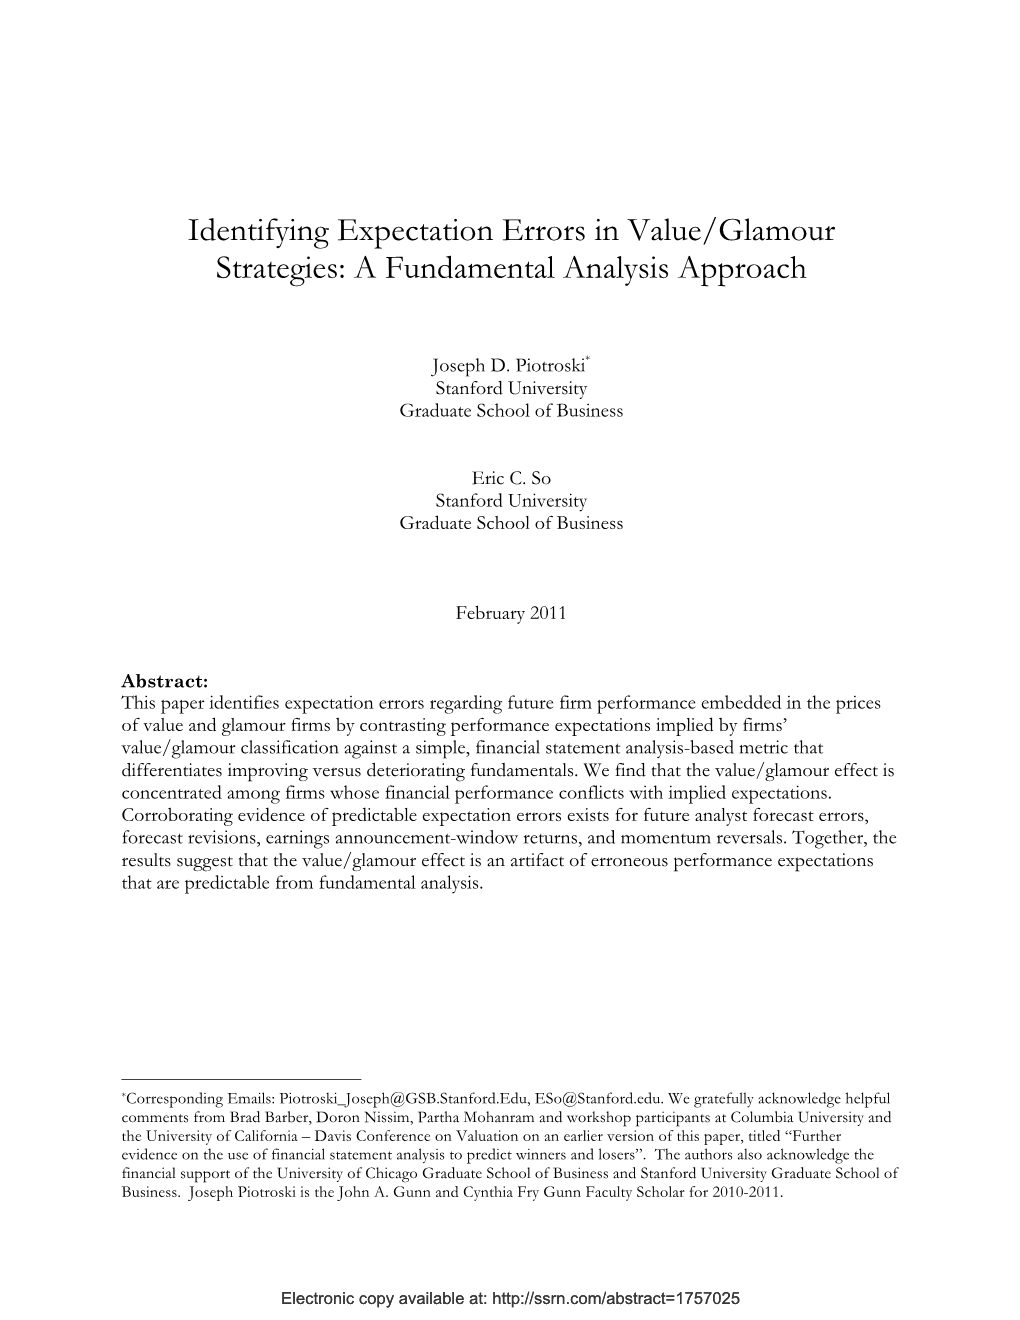 Identifying Expectation Errors in Value/Glamour Strategies: a Fundamental Analysis Approach